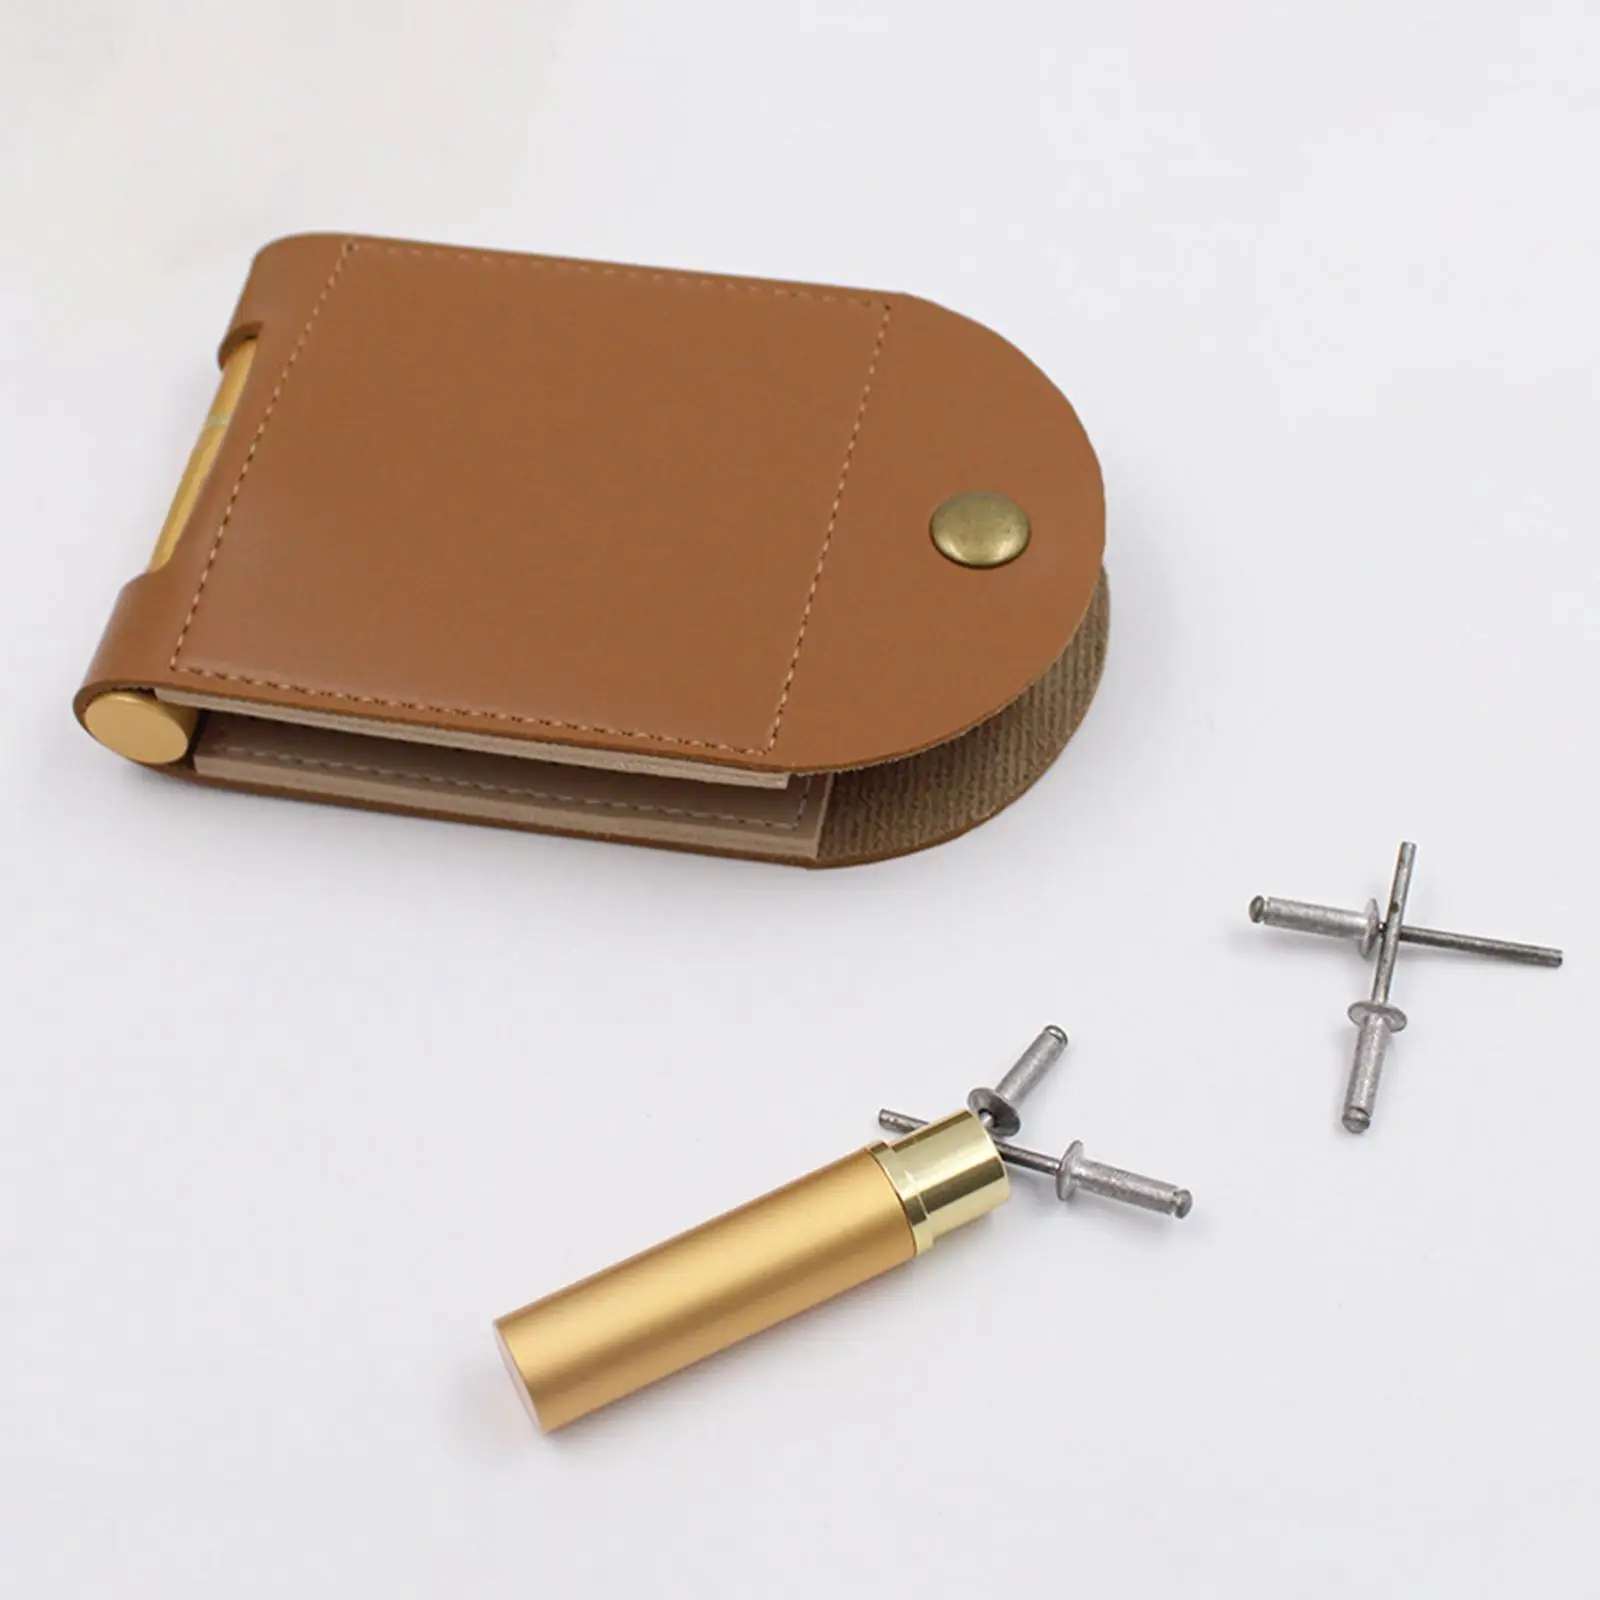 PU Leather Playing Card Case Holder Small Size Fits and Bridge Size Cards Multiple Functions Comfortable Daily Use